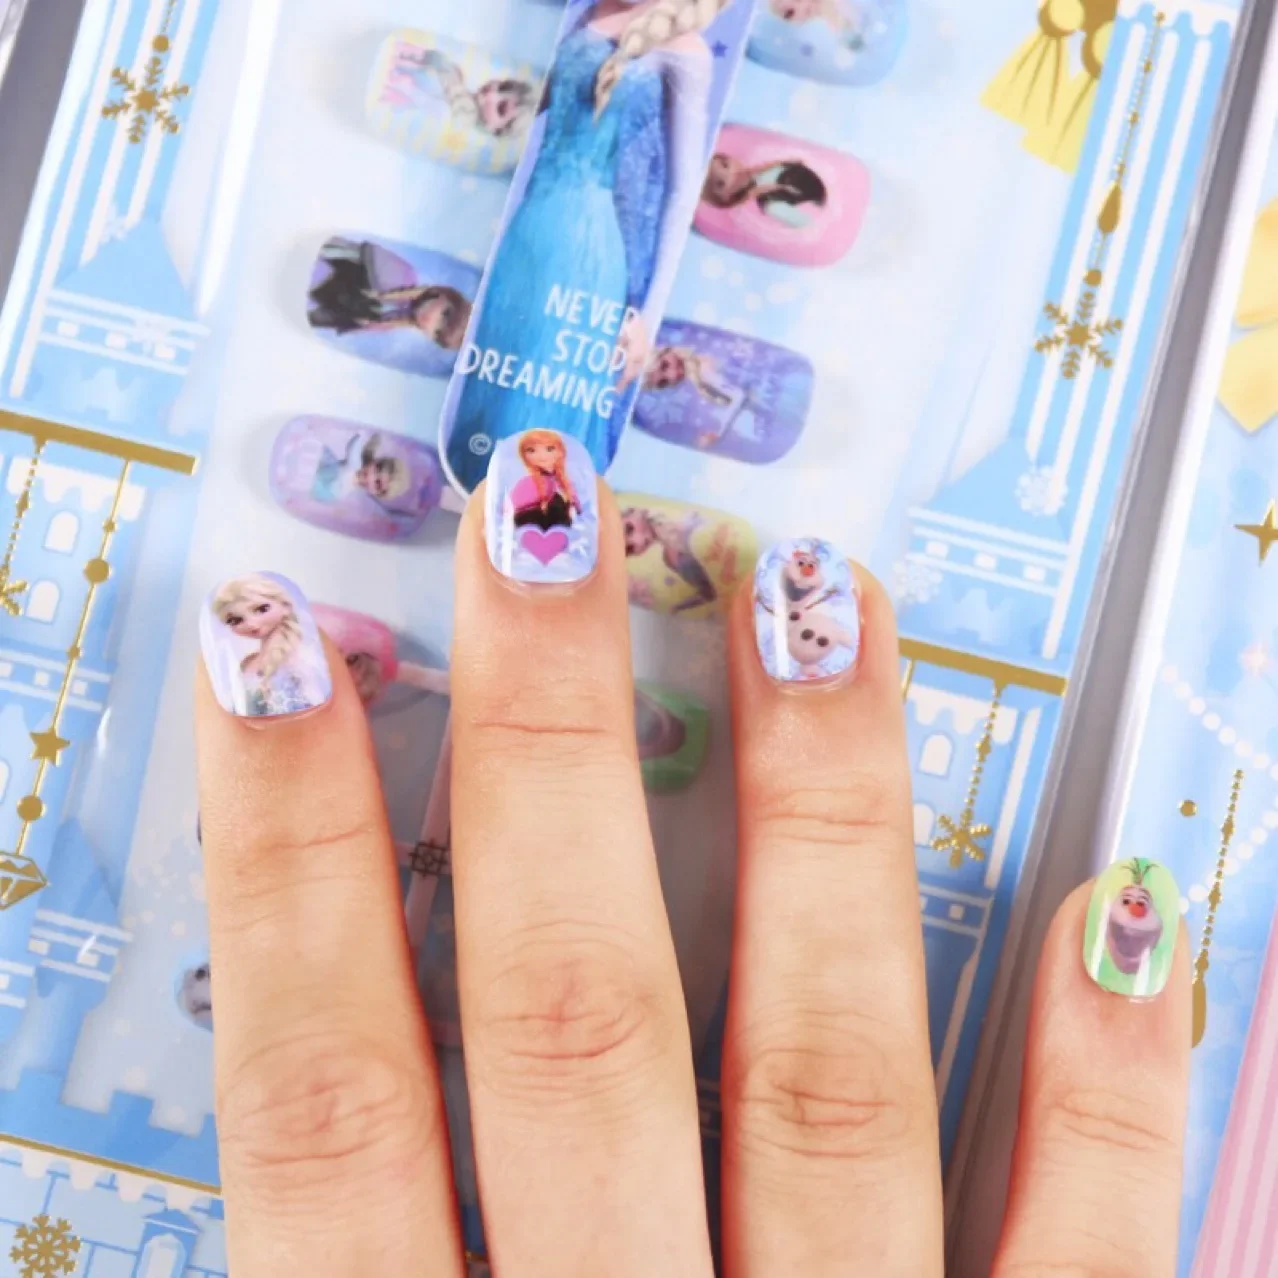 Nomakenolife - Beautiful Frozen nail art by @ayaka.horie 💅❄️ Have you  watched Frozen 2 yet? We loved it! 😍 | Facebook